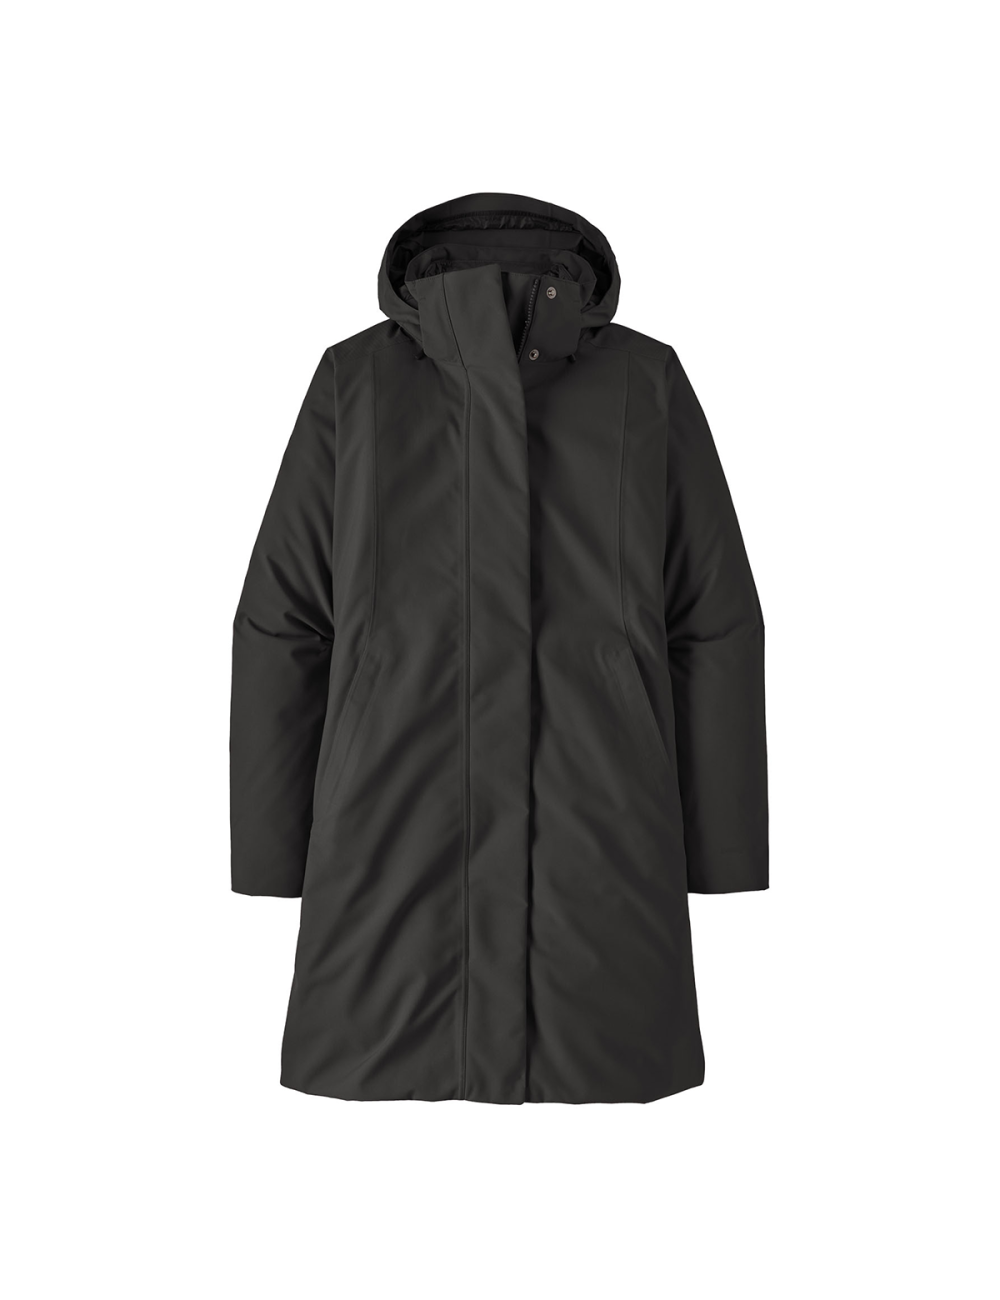 Patagonia Wms 3-in-1 Parka - Black